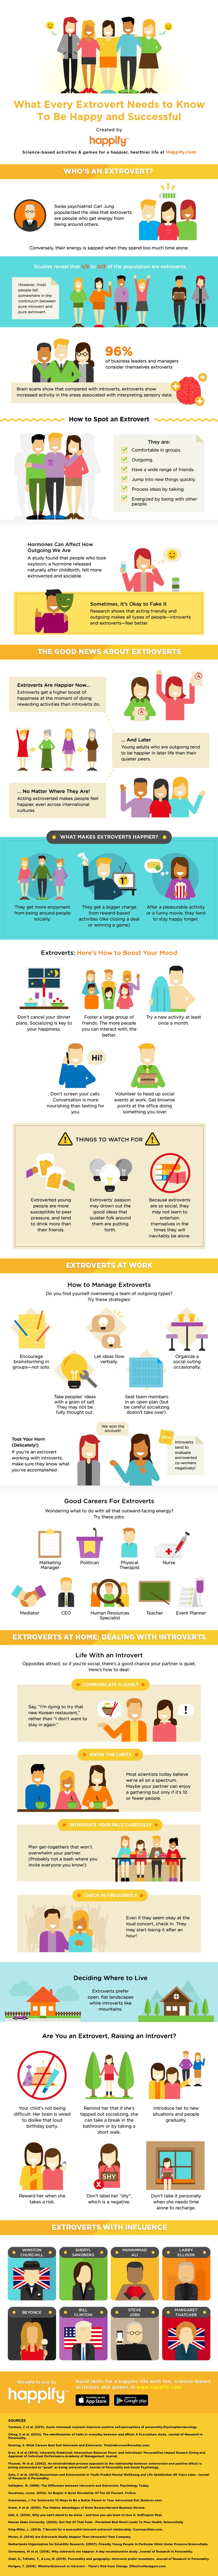 Infographic-An-ExtrovertaE™s-Guide-to-Success-Happiness Infographic : An Extrovertâ€™s Guide to Success & Happiness